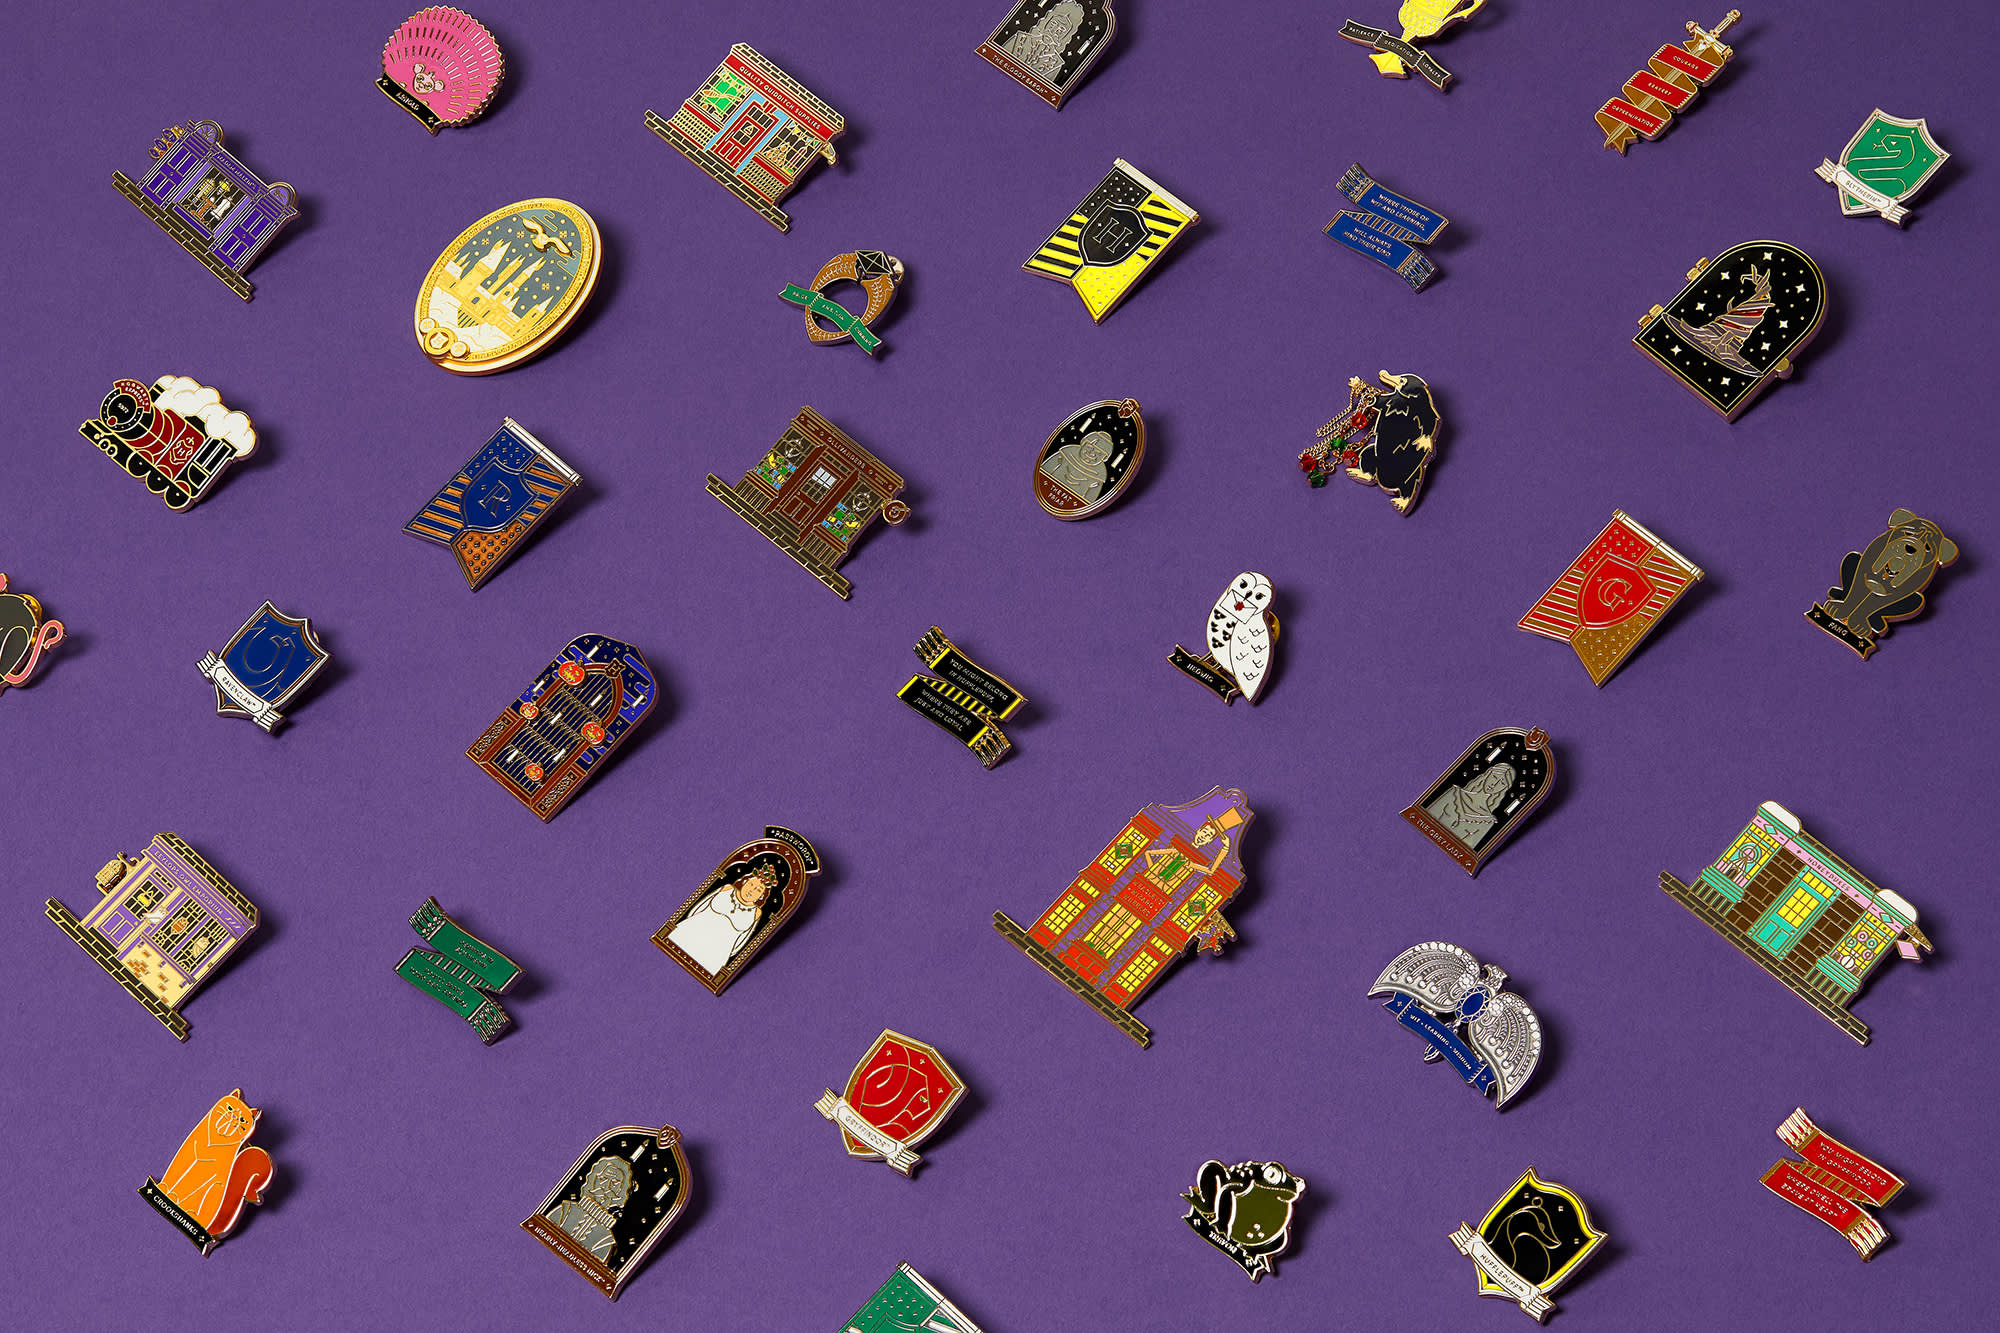 All the pins available so far in the Harry Potter Fan Club